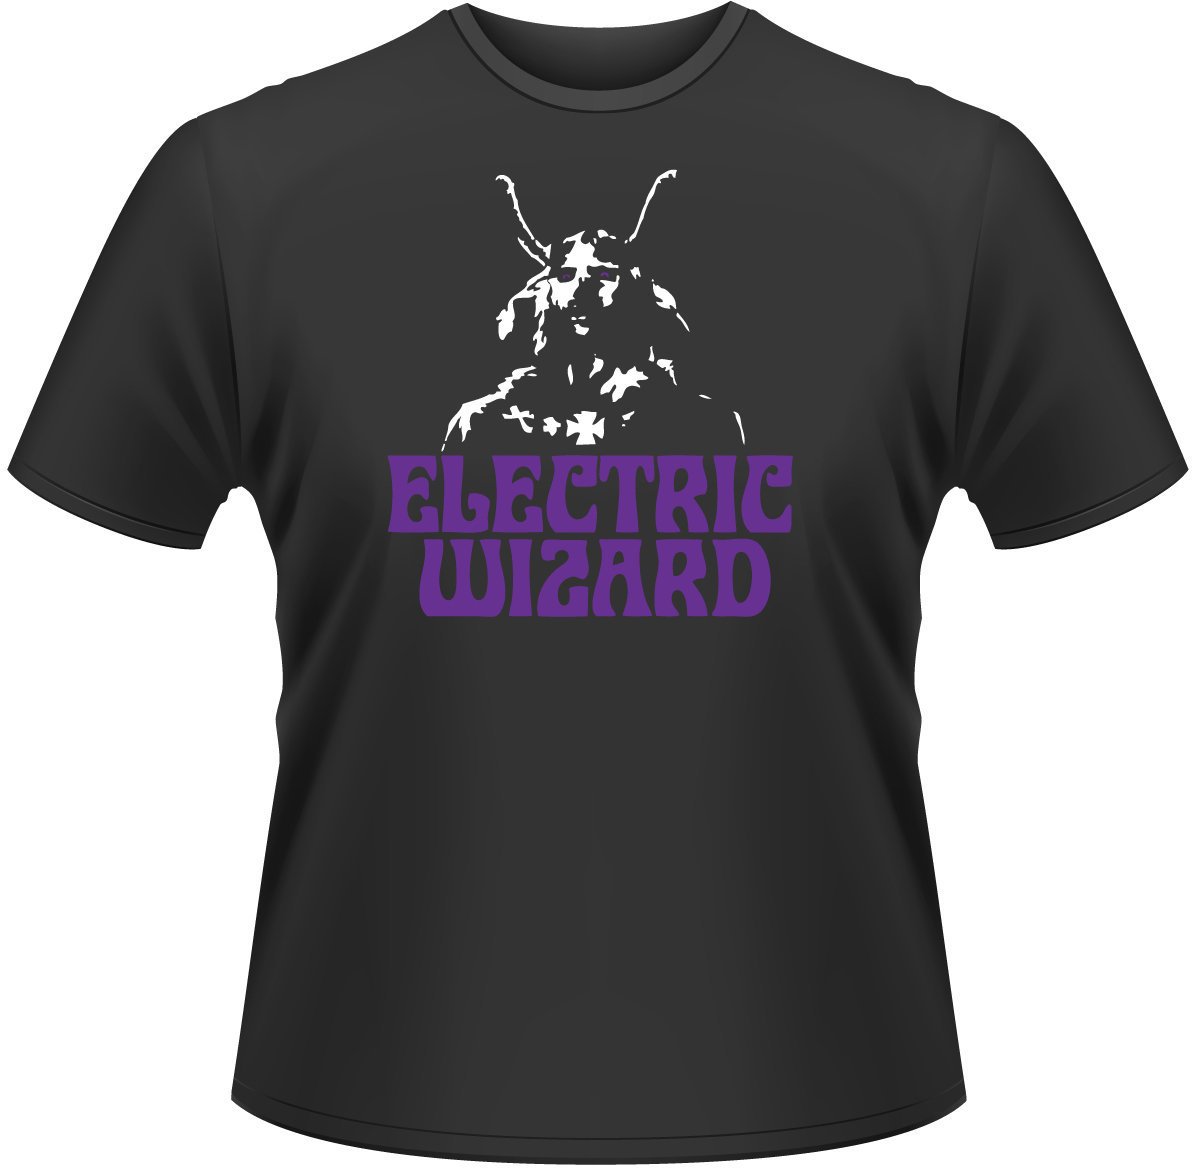 T-shirt Electric Wizard T-shirt Witchcult Today Masculino Black S